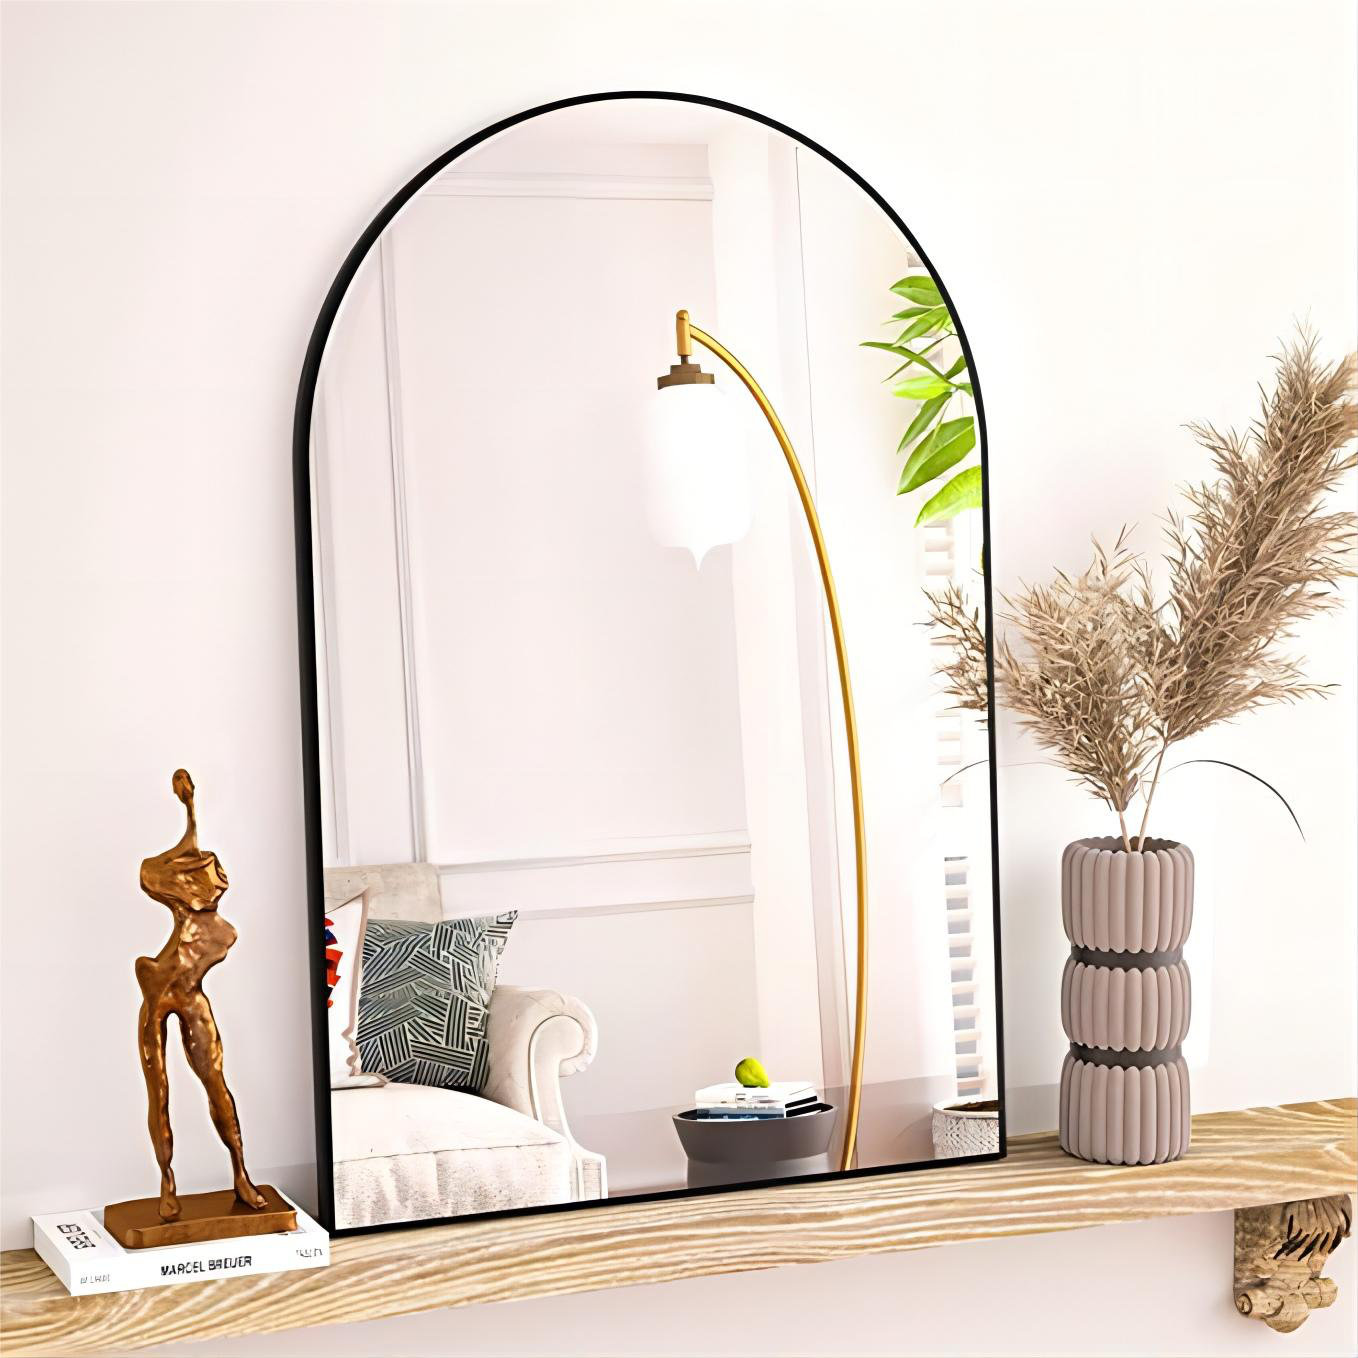 DIY - Do It Yourself New Wall Mirror Stickers, Roses, Made of Acrylic  Material Like Mirror, Modern Design for Home Living Room Bedroom Kitchen  Baby